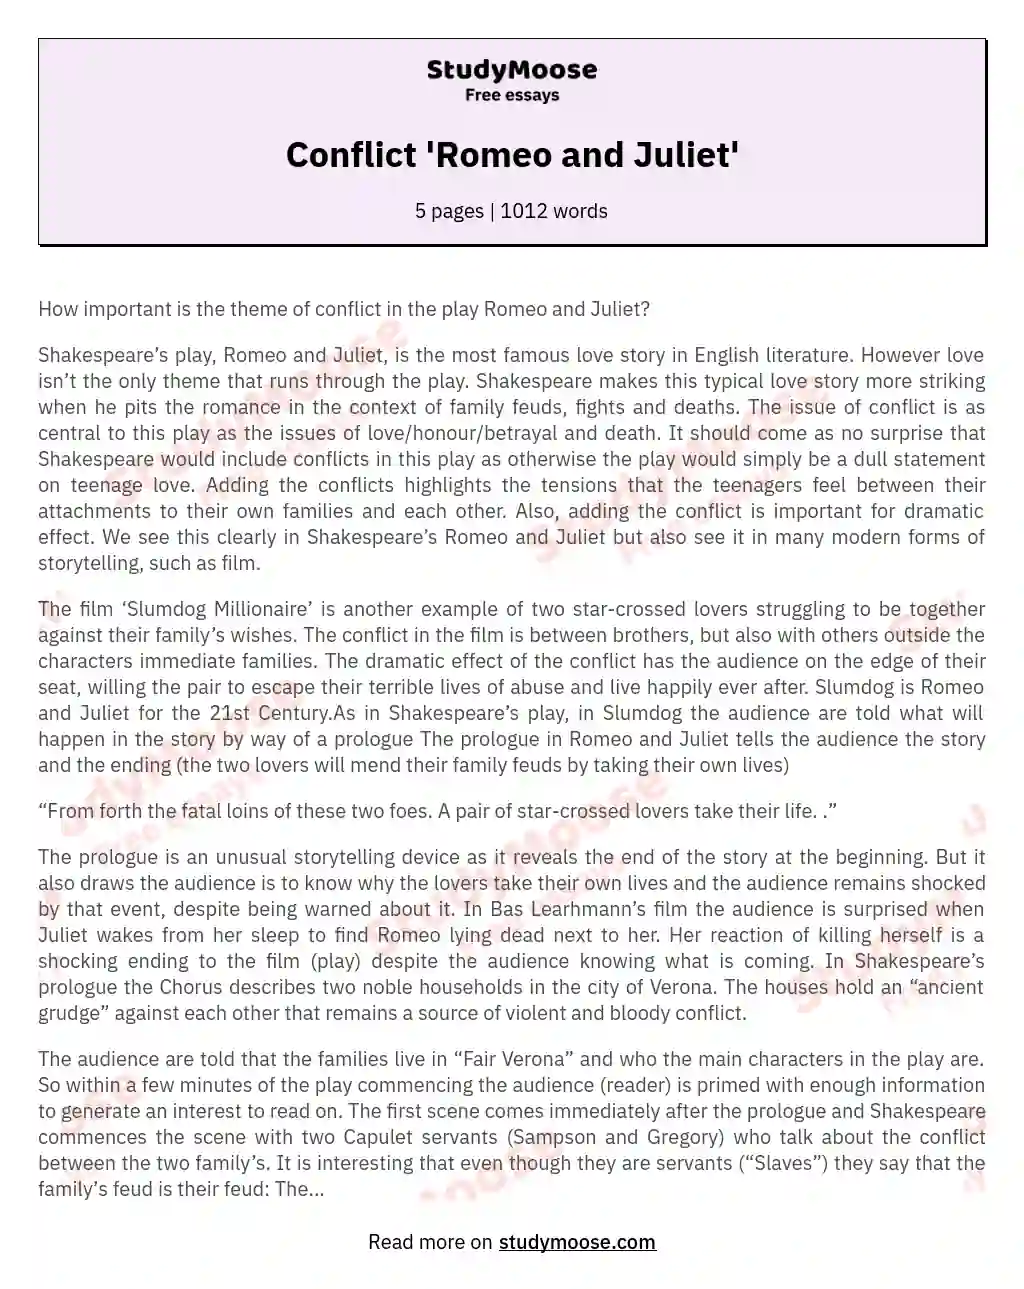 thesis statement romeo and juliet death